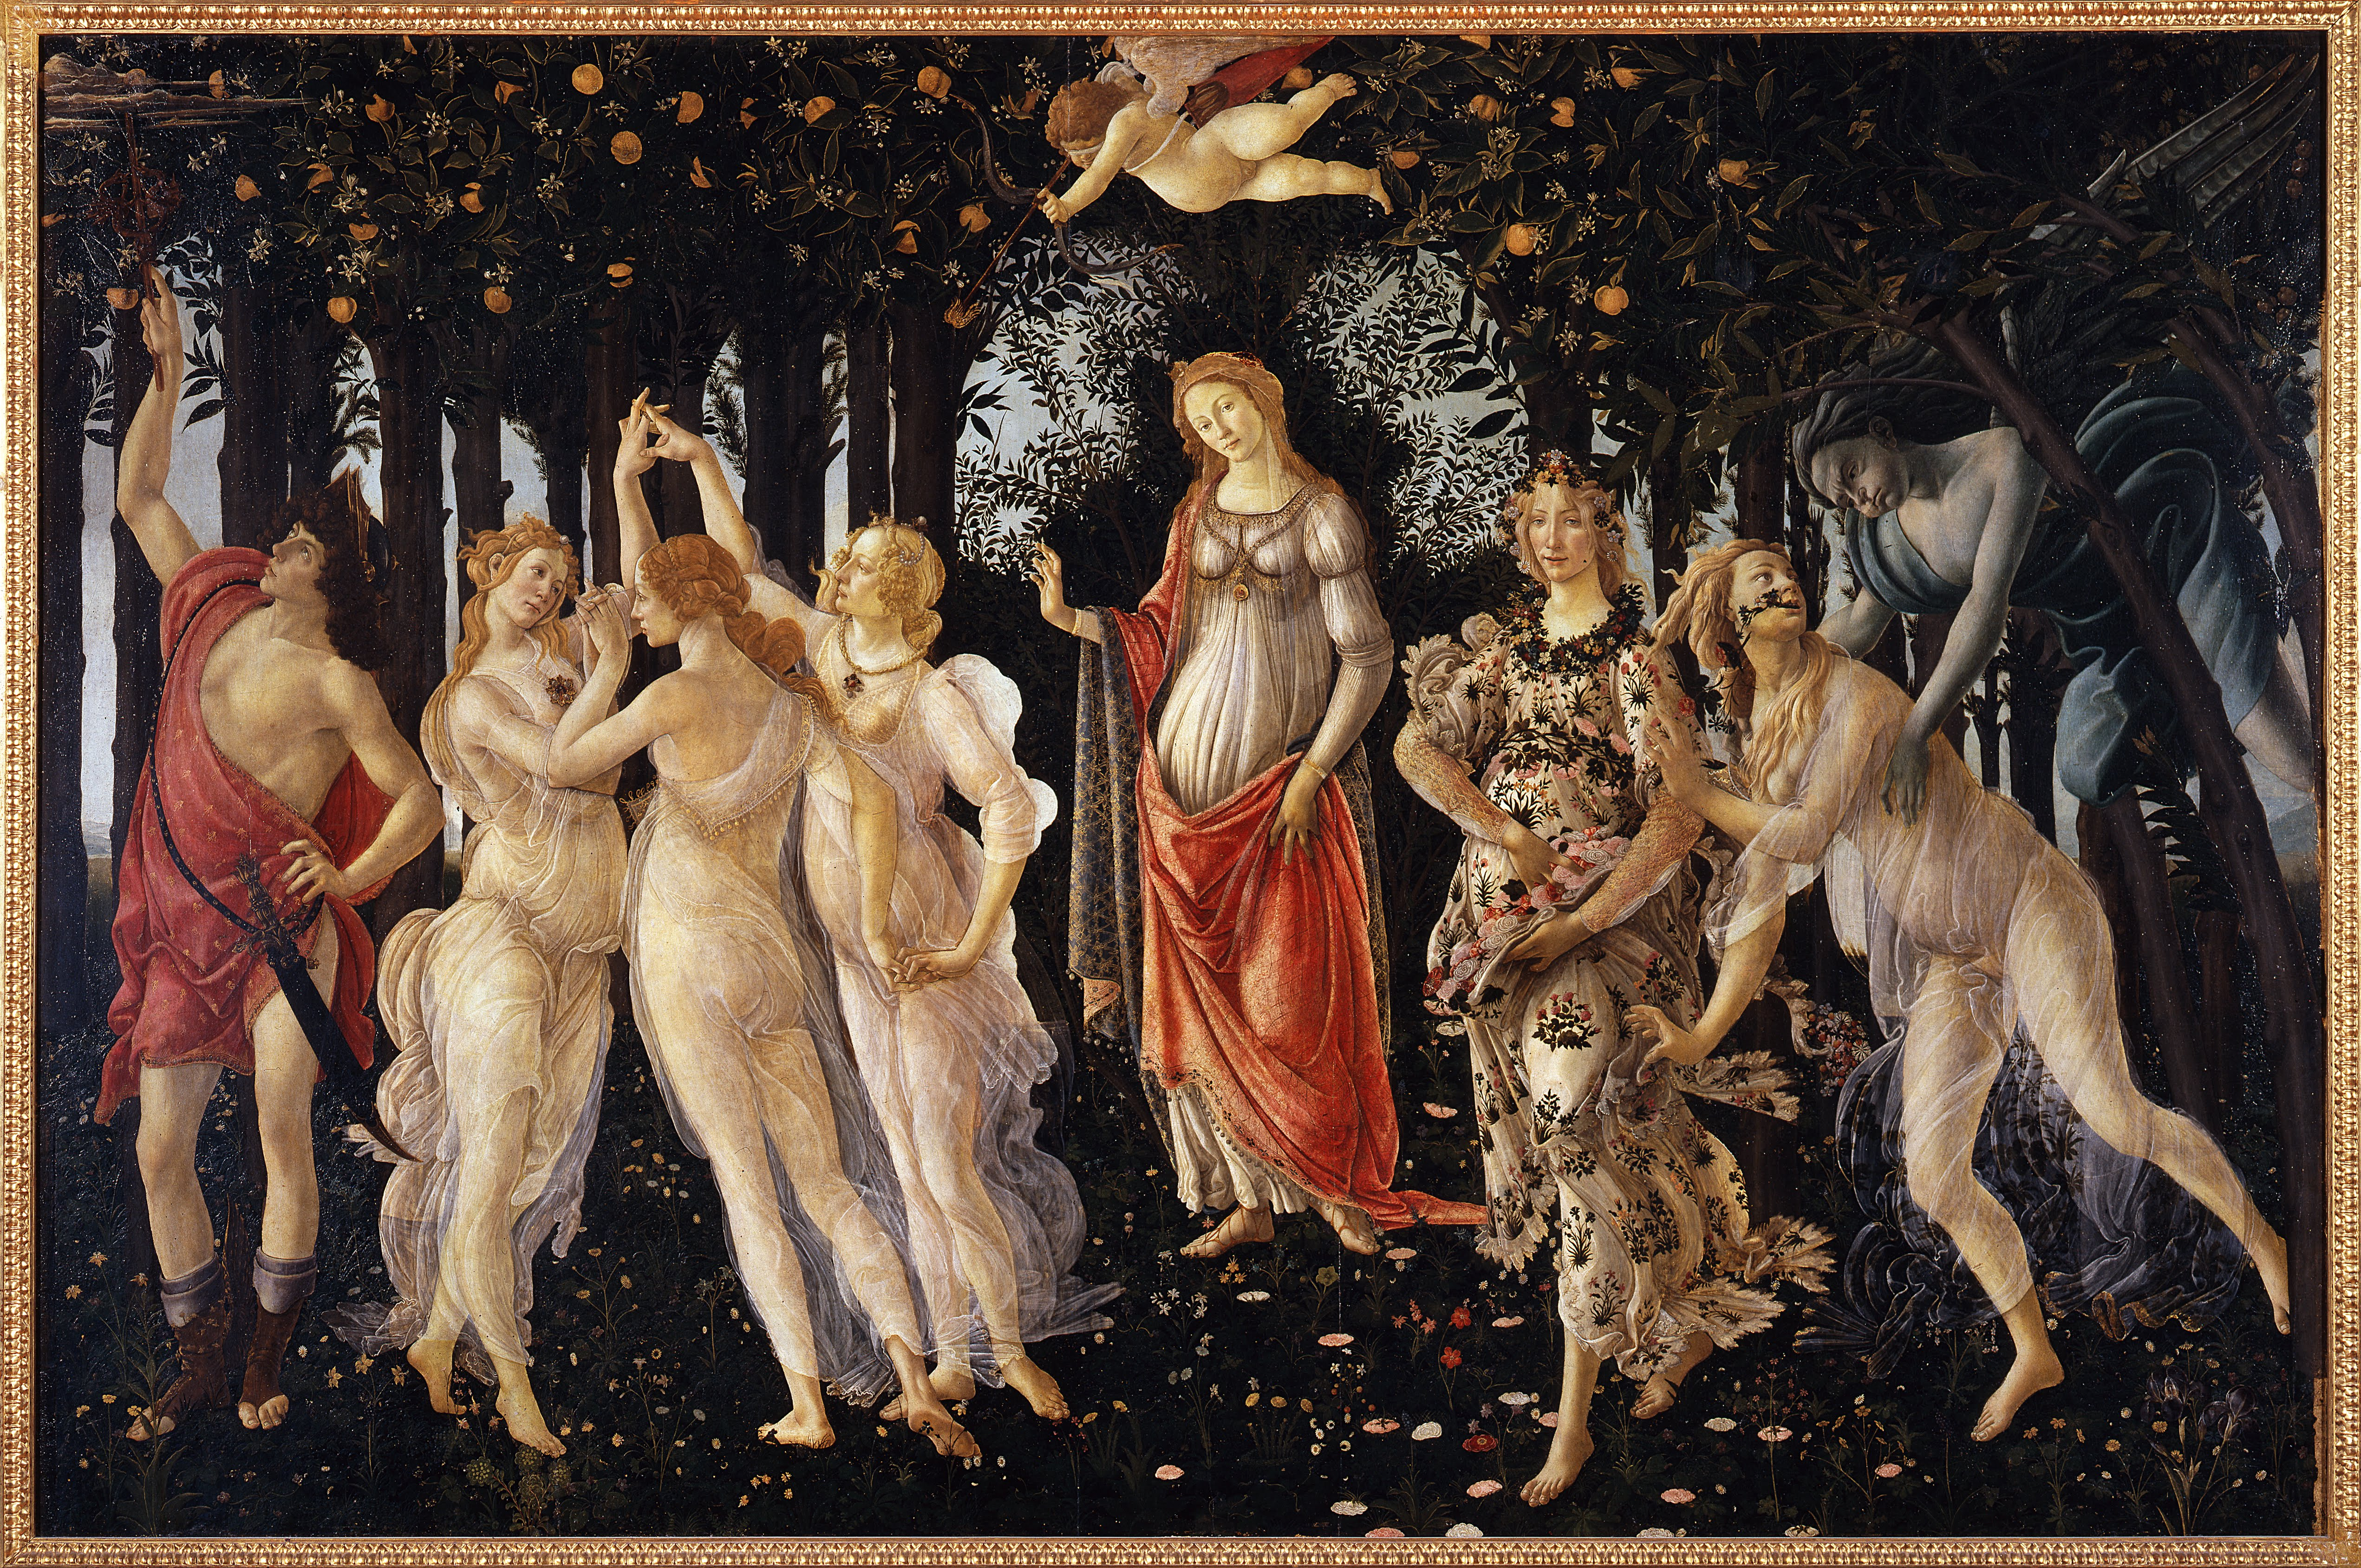 Sandro Botticelli’s masterpiece, ‘La Primavera (Spring),’ photographed in February 2011. On July 22, activists protesting climate change glued their hands to the glass covering the painting, which was unharmed. Image courtesy of Wikimedia Commons, photo credit DcoetzeeBot. The work is in the public domain because it was published or registered with the U.S. Copyright Office before January 1, 1927.